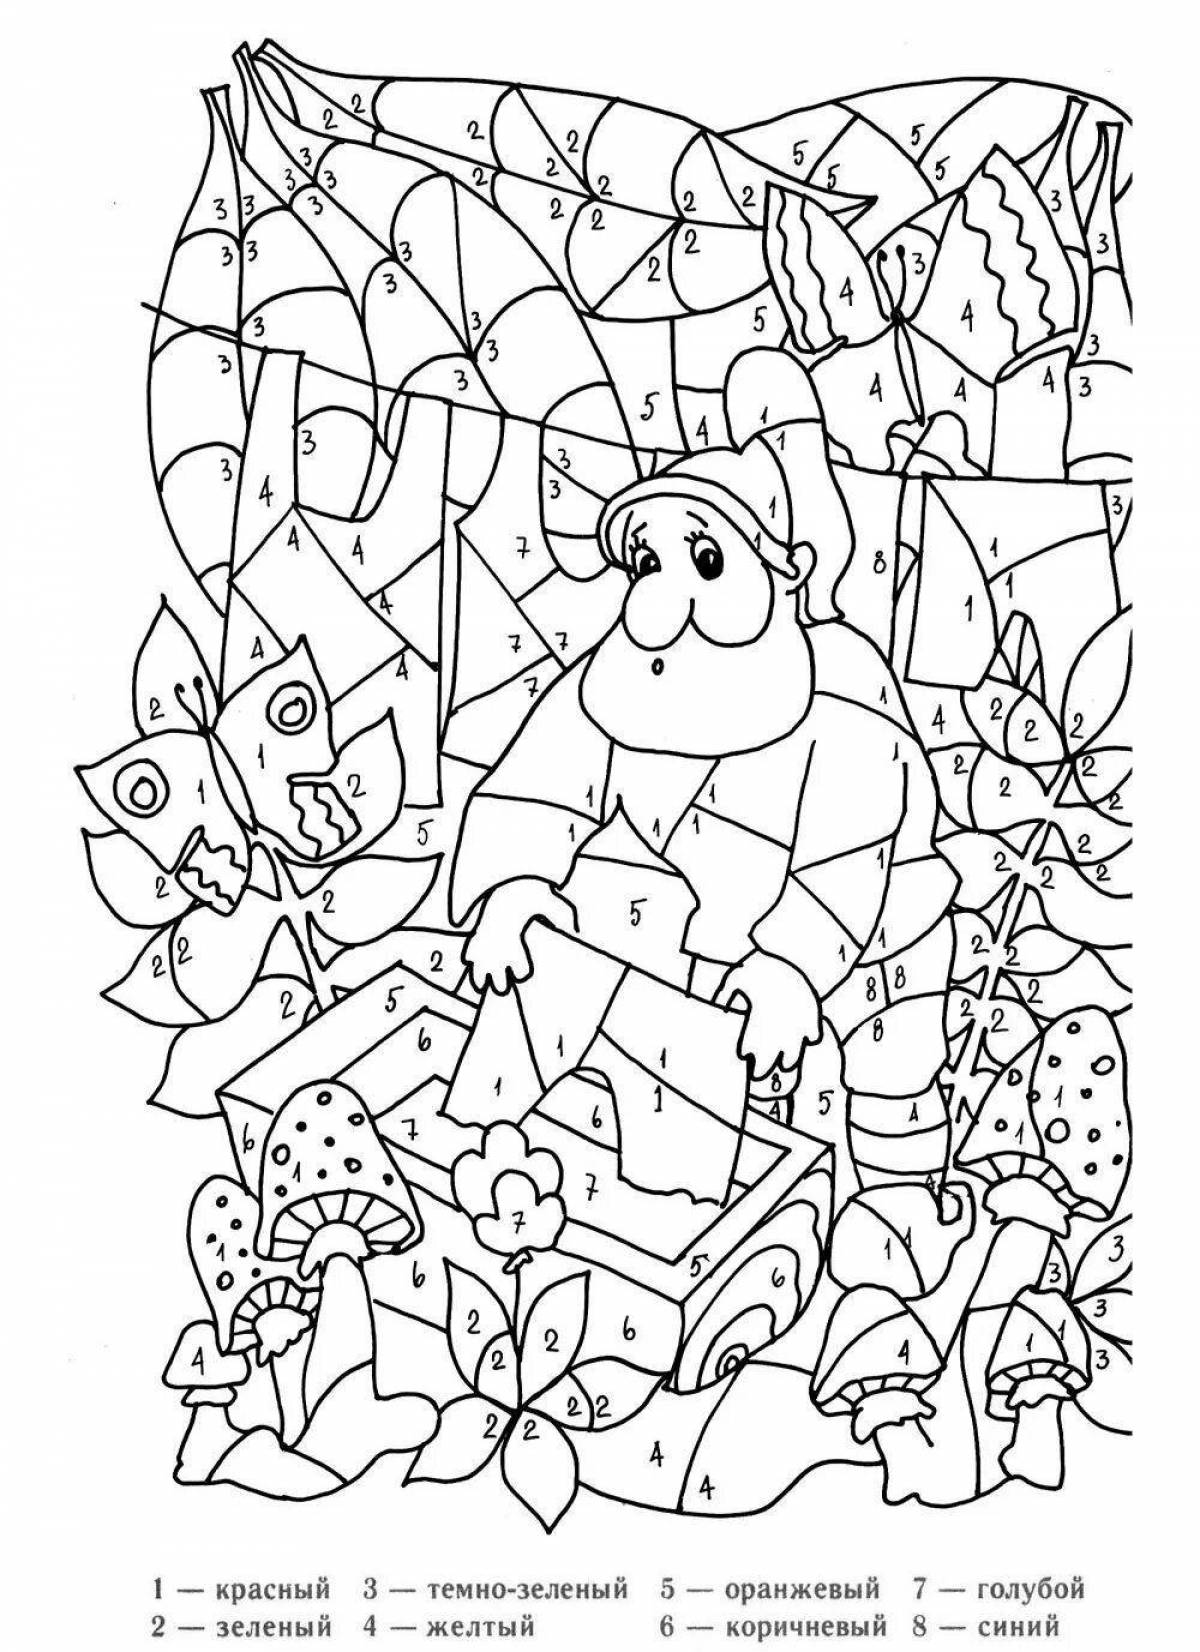 Sparkly fairy tale coloring by numbers